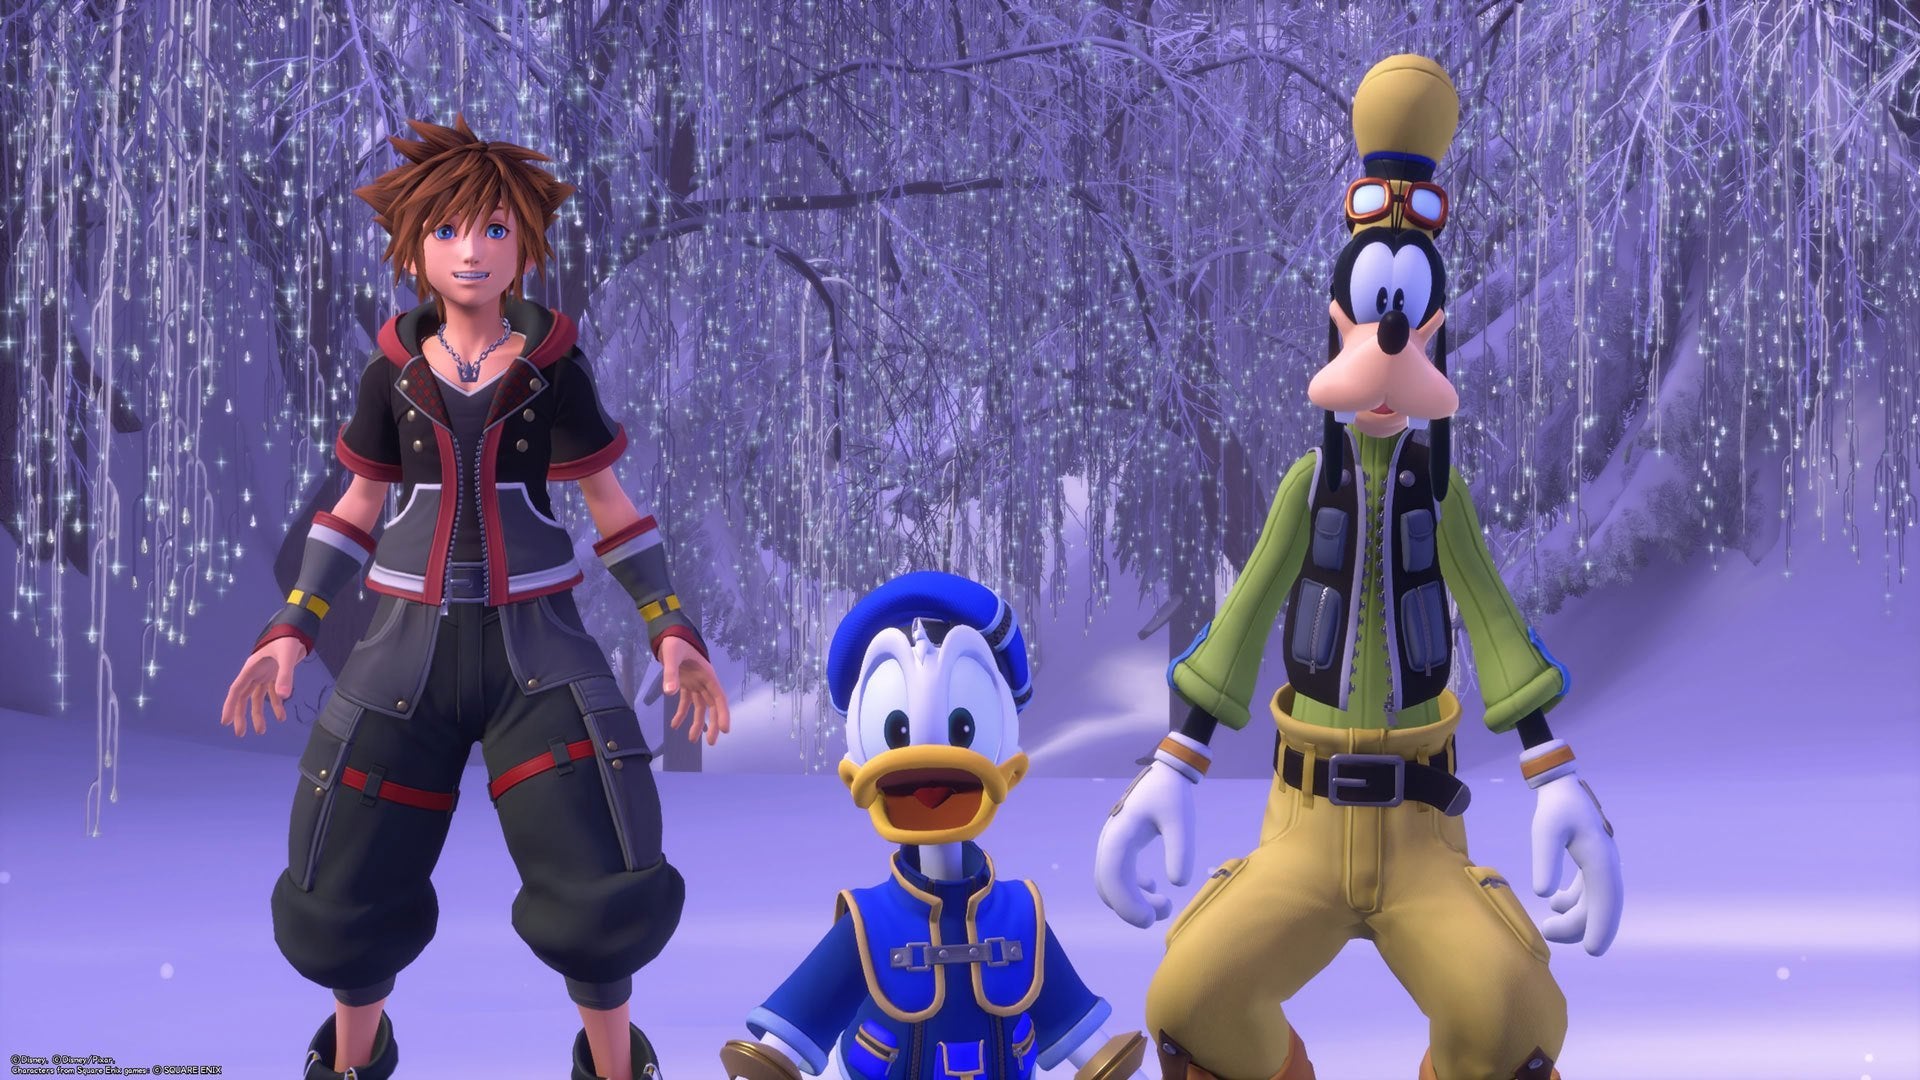 Image for Kingdom Hearts 3 for $30, God of War for $25 and other top console game deals